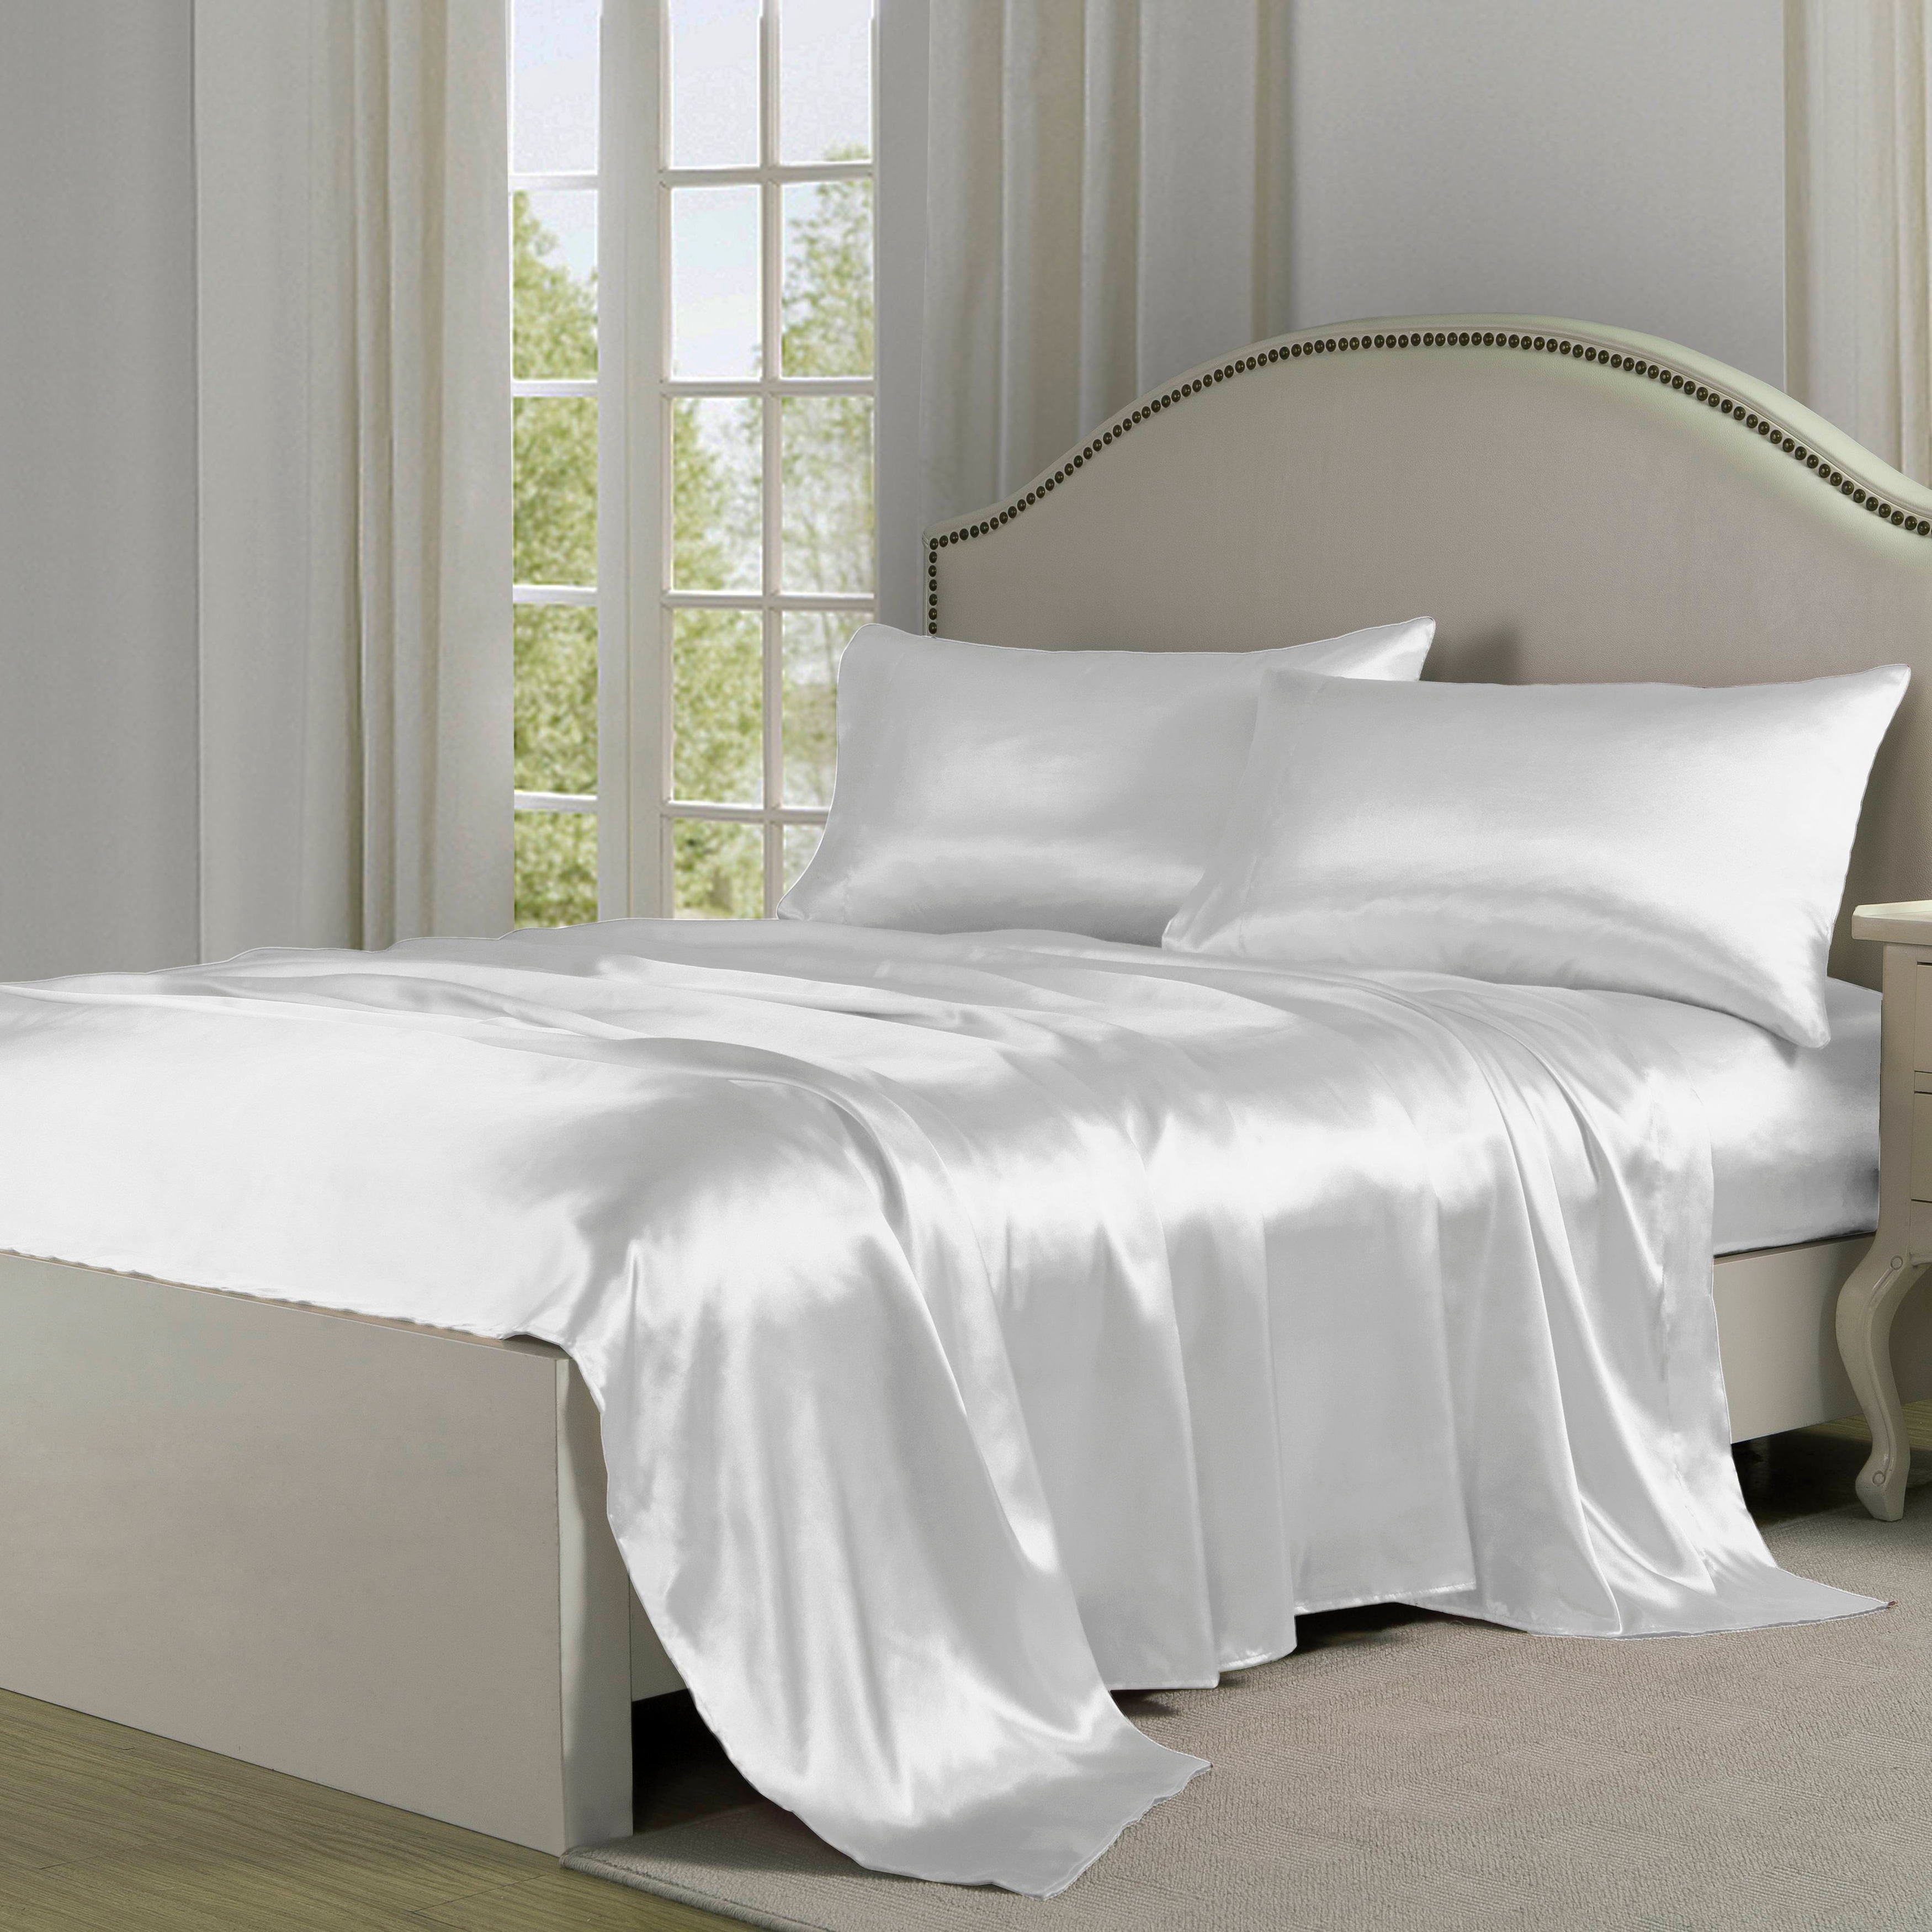 Details about   Select Bedding Set 1000 Thread Count Egyptian Cotton Wine Pattern US Sizes 